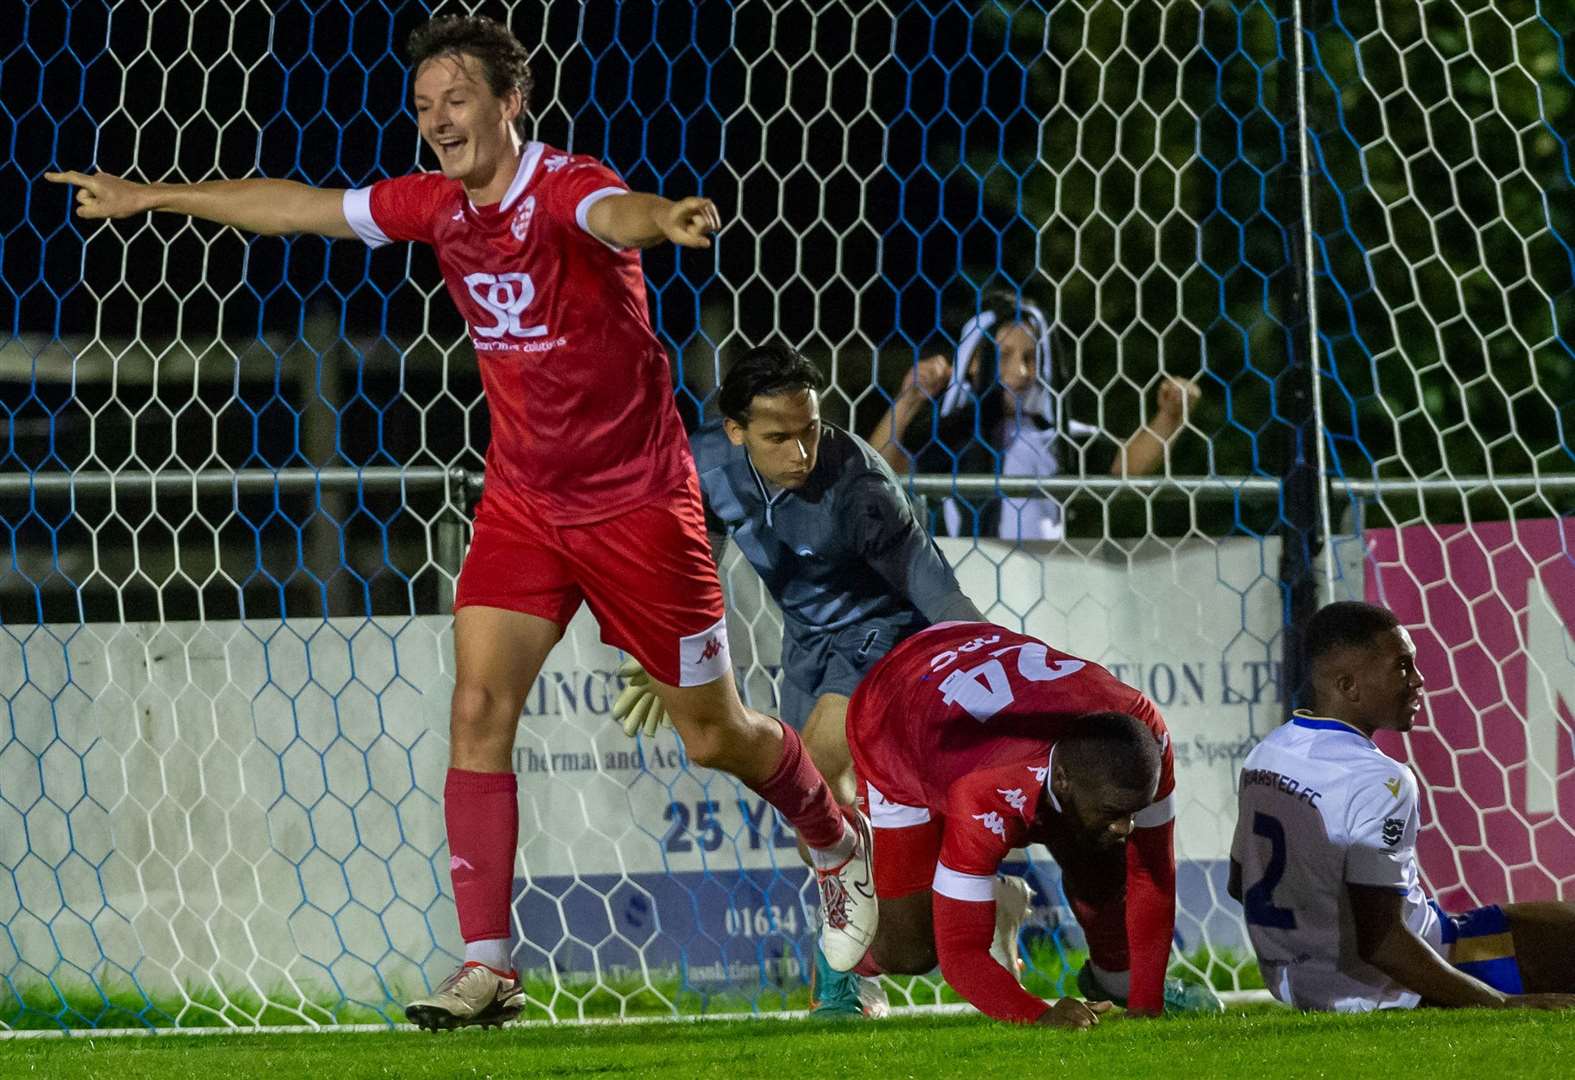 Billy Bennett celebrates after doubling Faversham's lead in their 2-1 triumph against Bearsted on Tuesday as Bears keeper Frankie Leonard and defender Dennis Agbudume are left on the floor. Picture: Ian Scammell